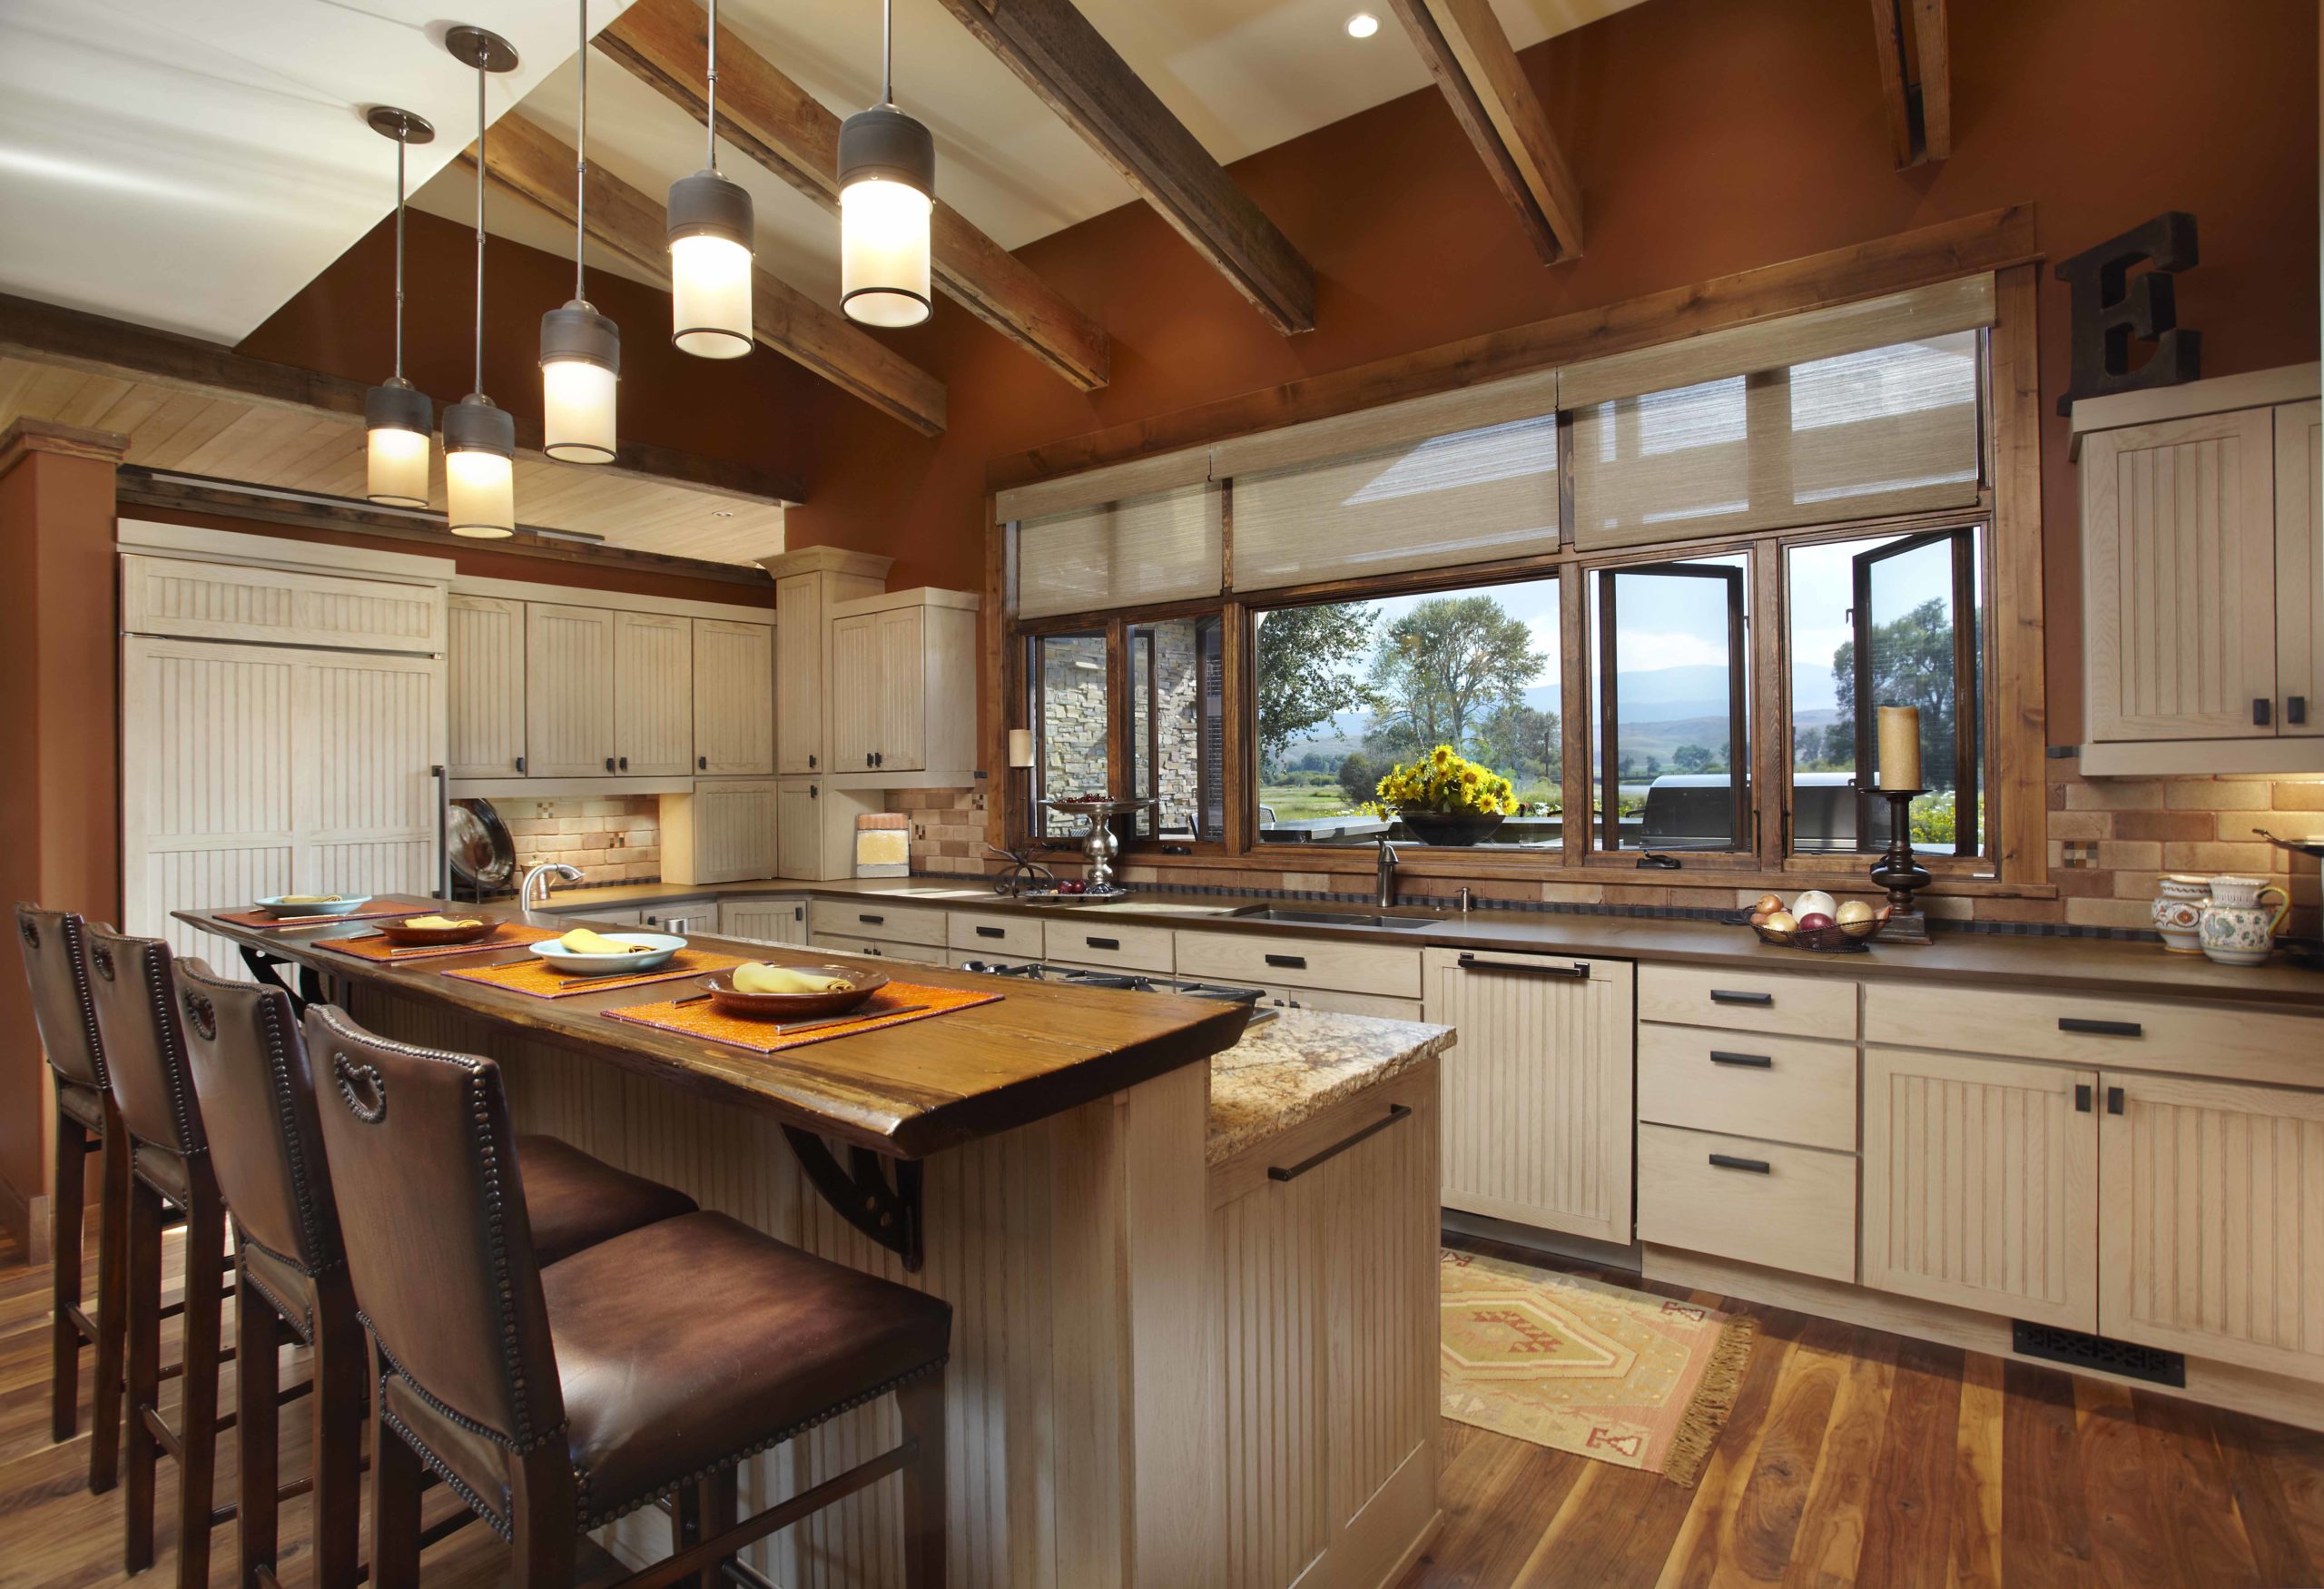 Kitchen with white washed cabinets, brown walls and dark wooden accents